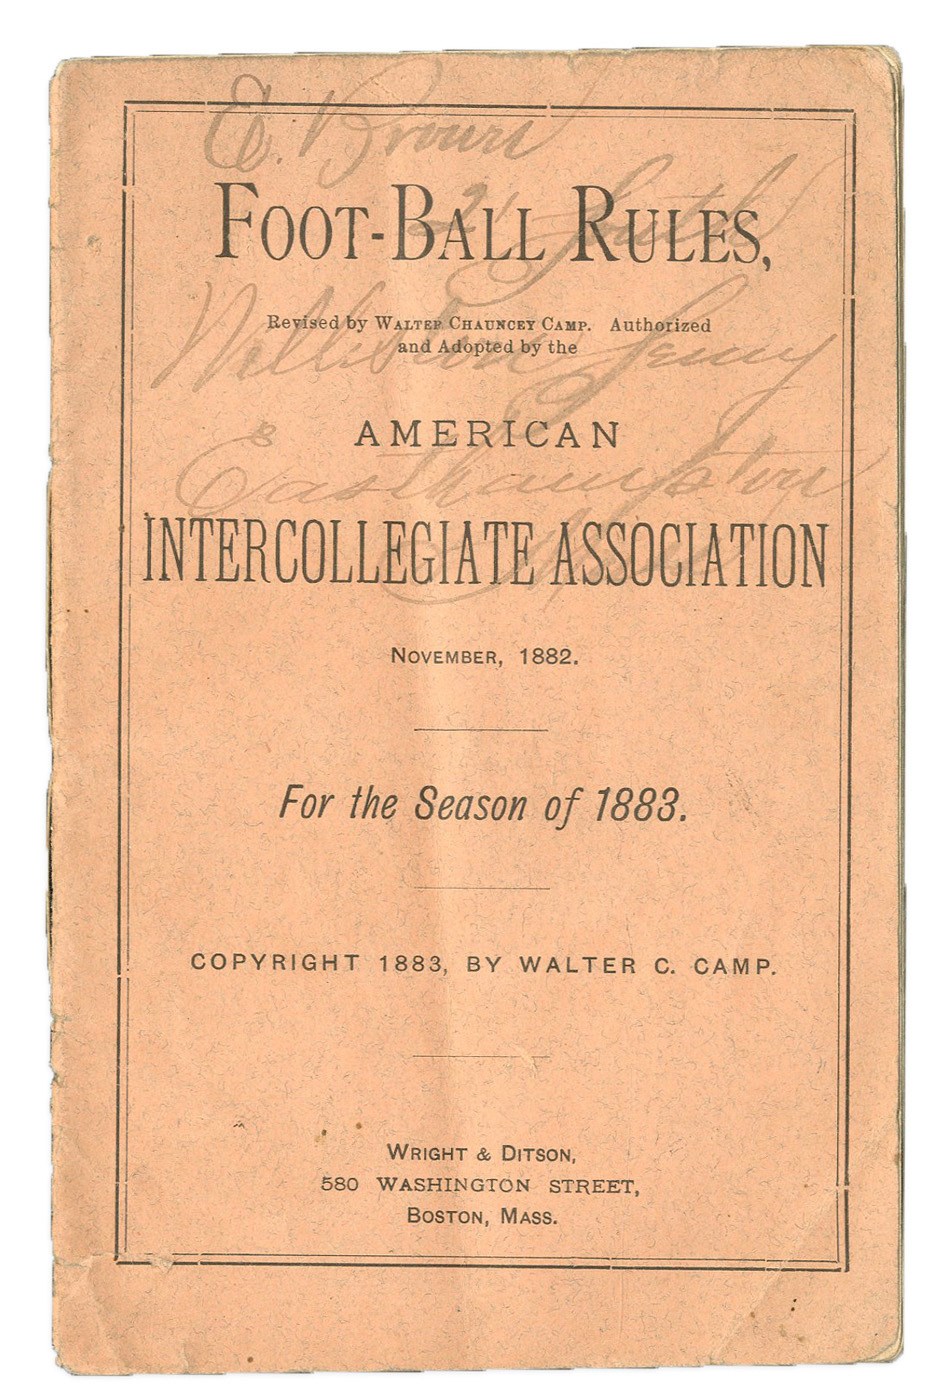 Football - 1882 Walter Camp's "Rules of Football" Book - Only Known Copy